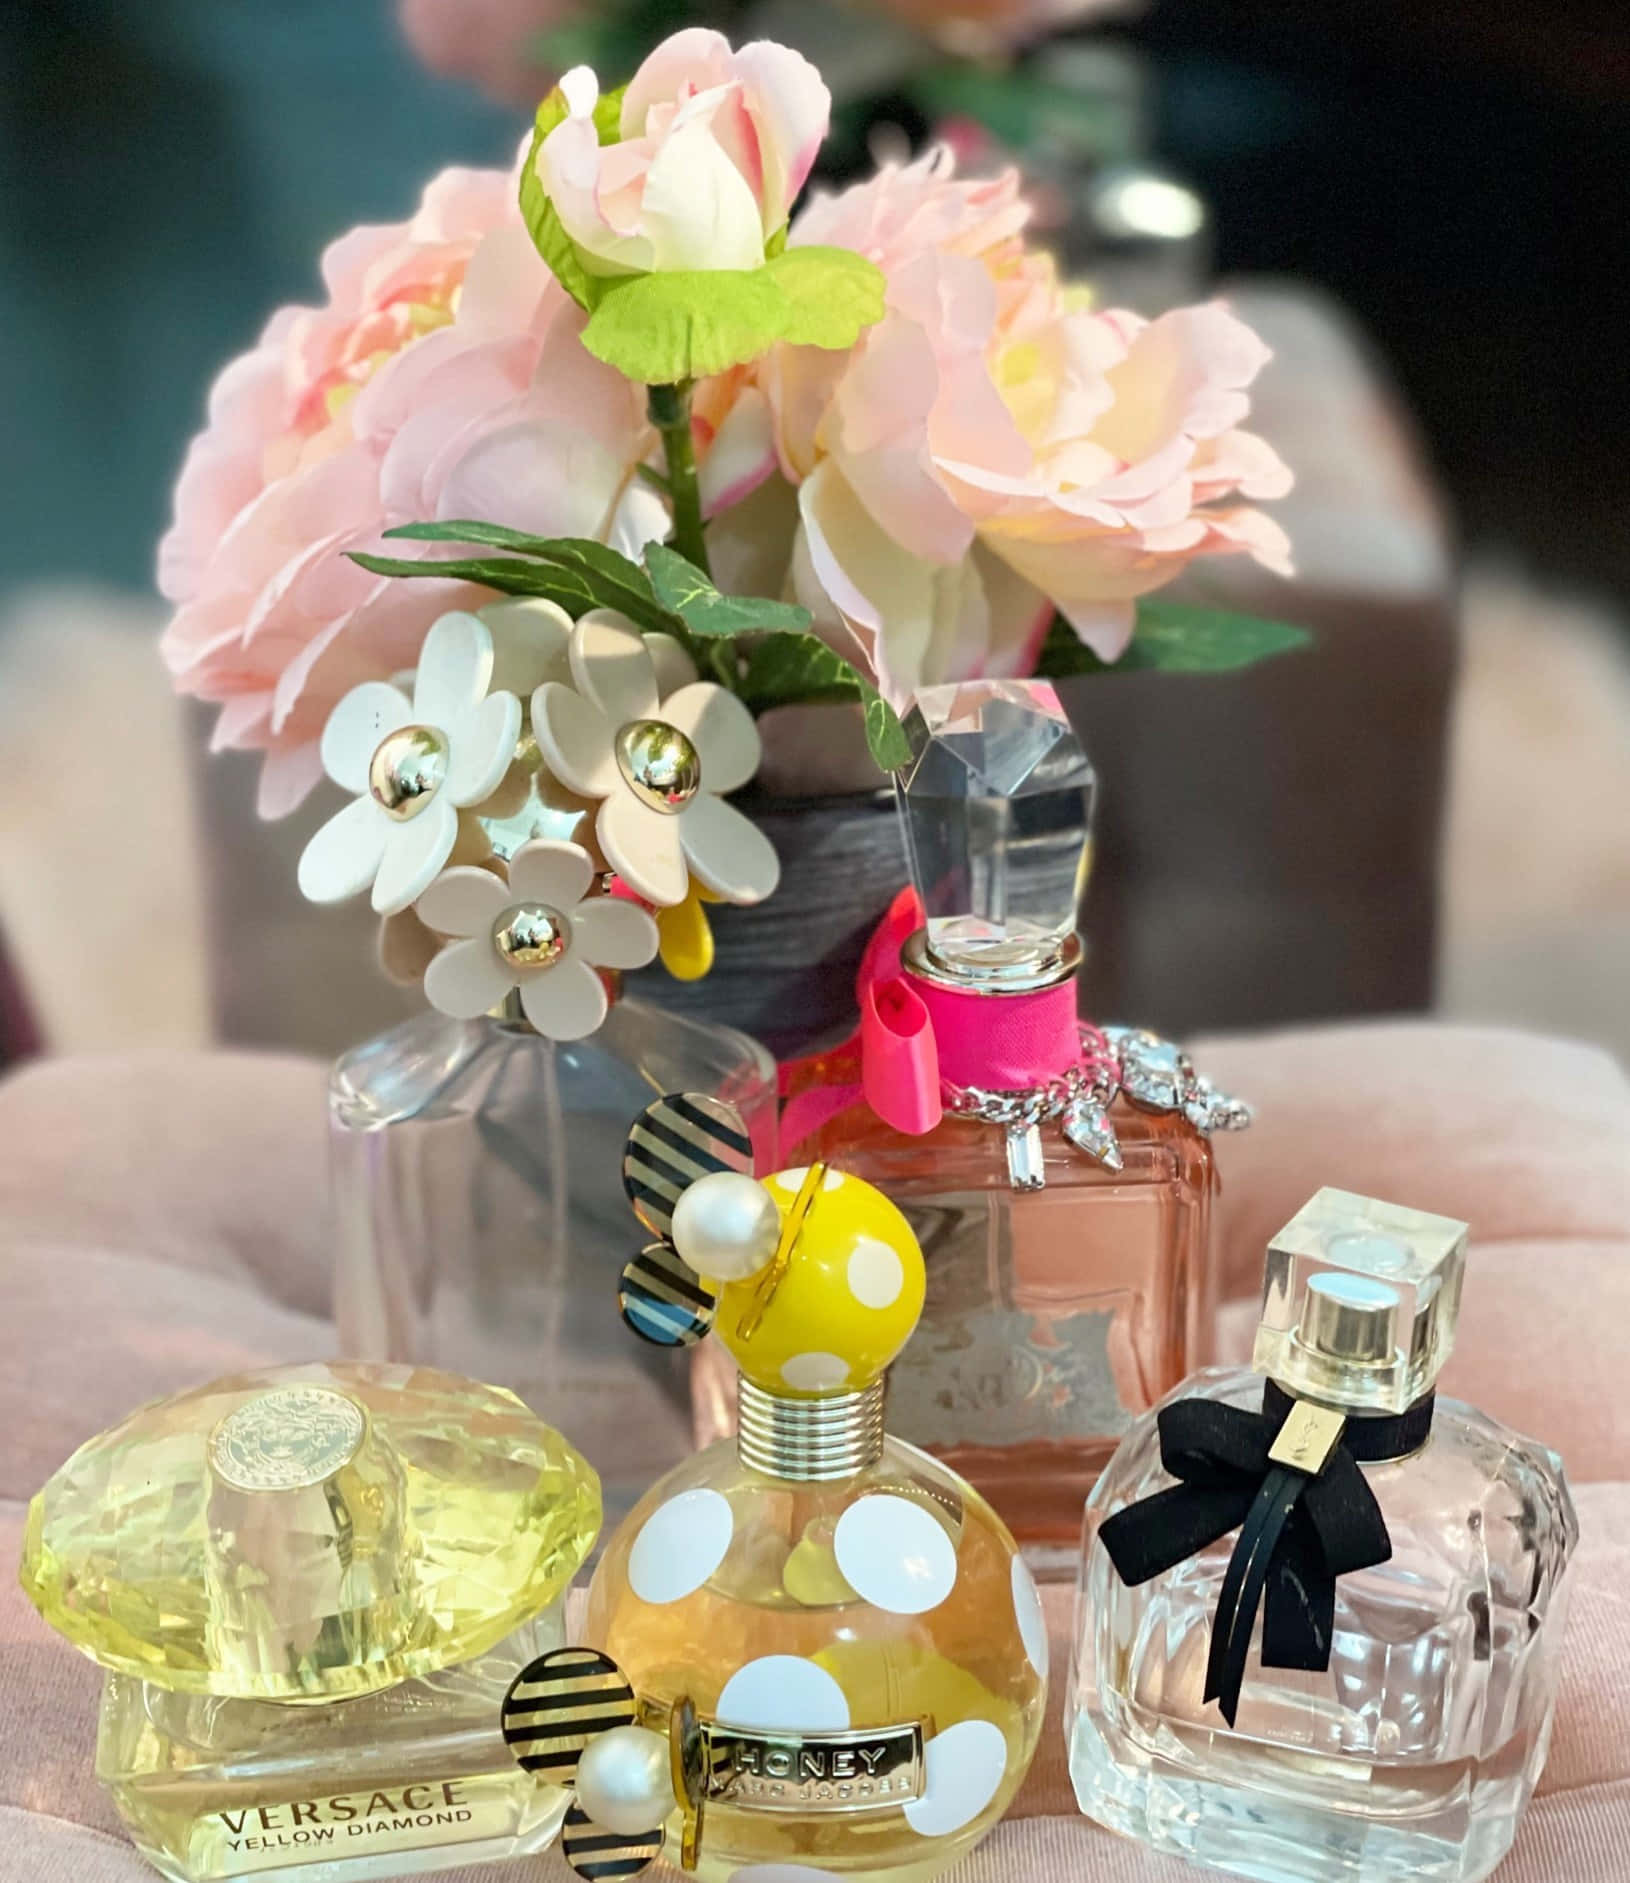 Delightful Spring Perfume in a Crystal Bottle surrounded by fresh flowers Wallpaper